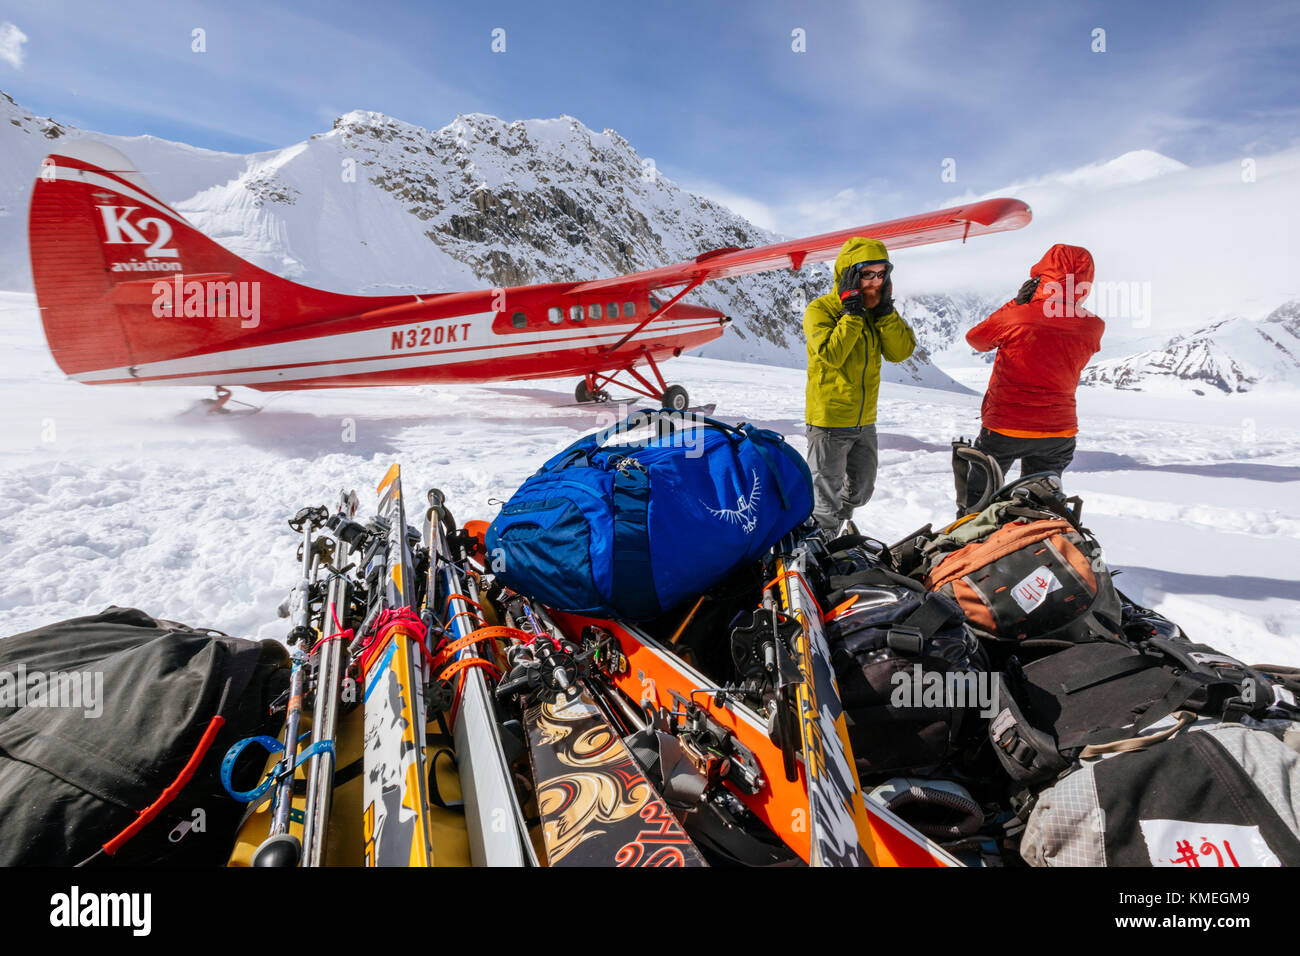 Two mountain climbers standing near baggage and protecting ears from noise of airplane taking off, Denali National Park, Alaska, USA Stock Photo